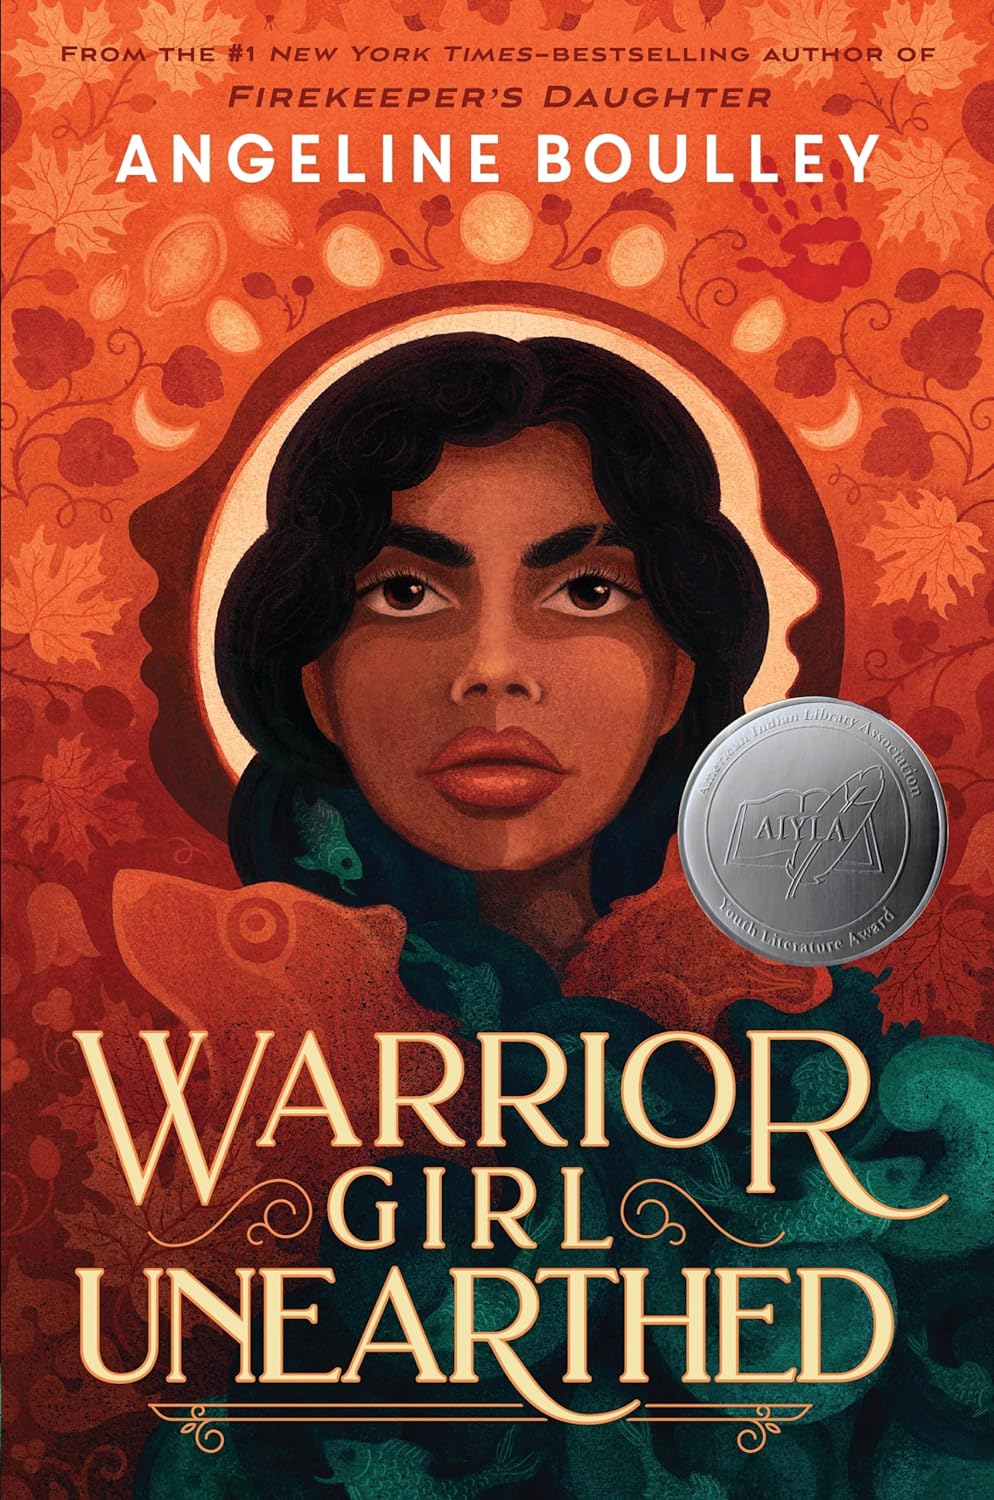 middle school books - Warrior Girl Unearthed by Angeline Boulley